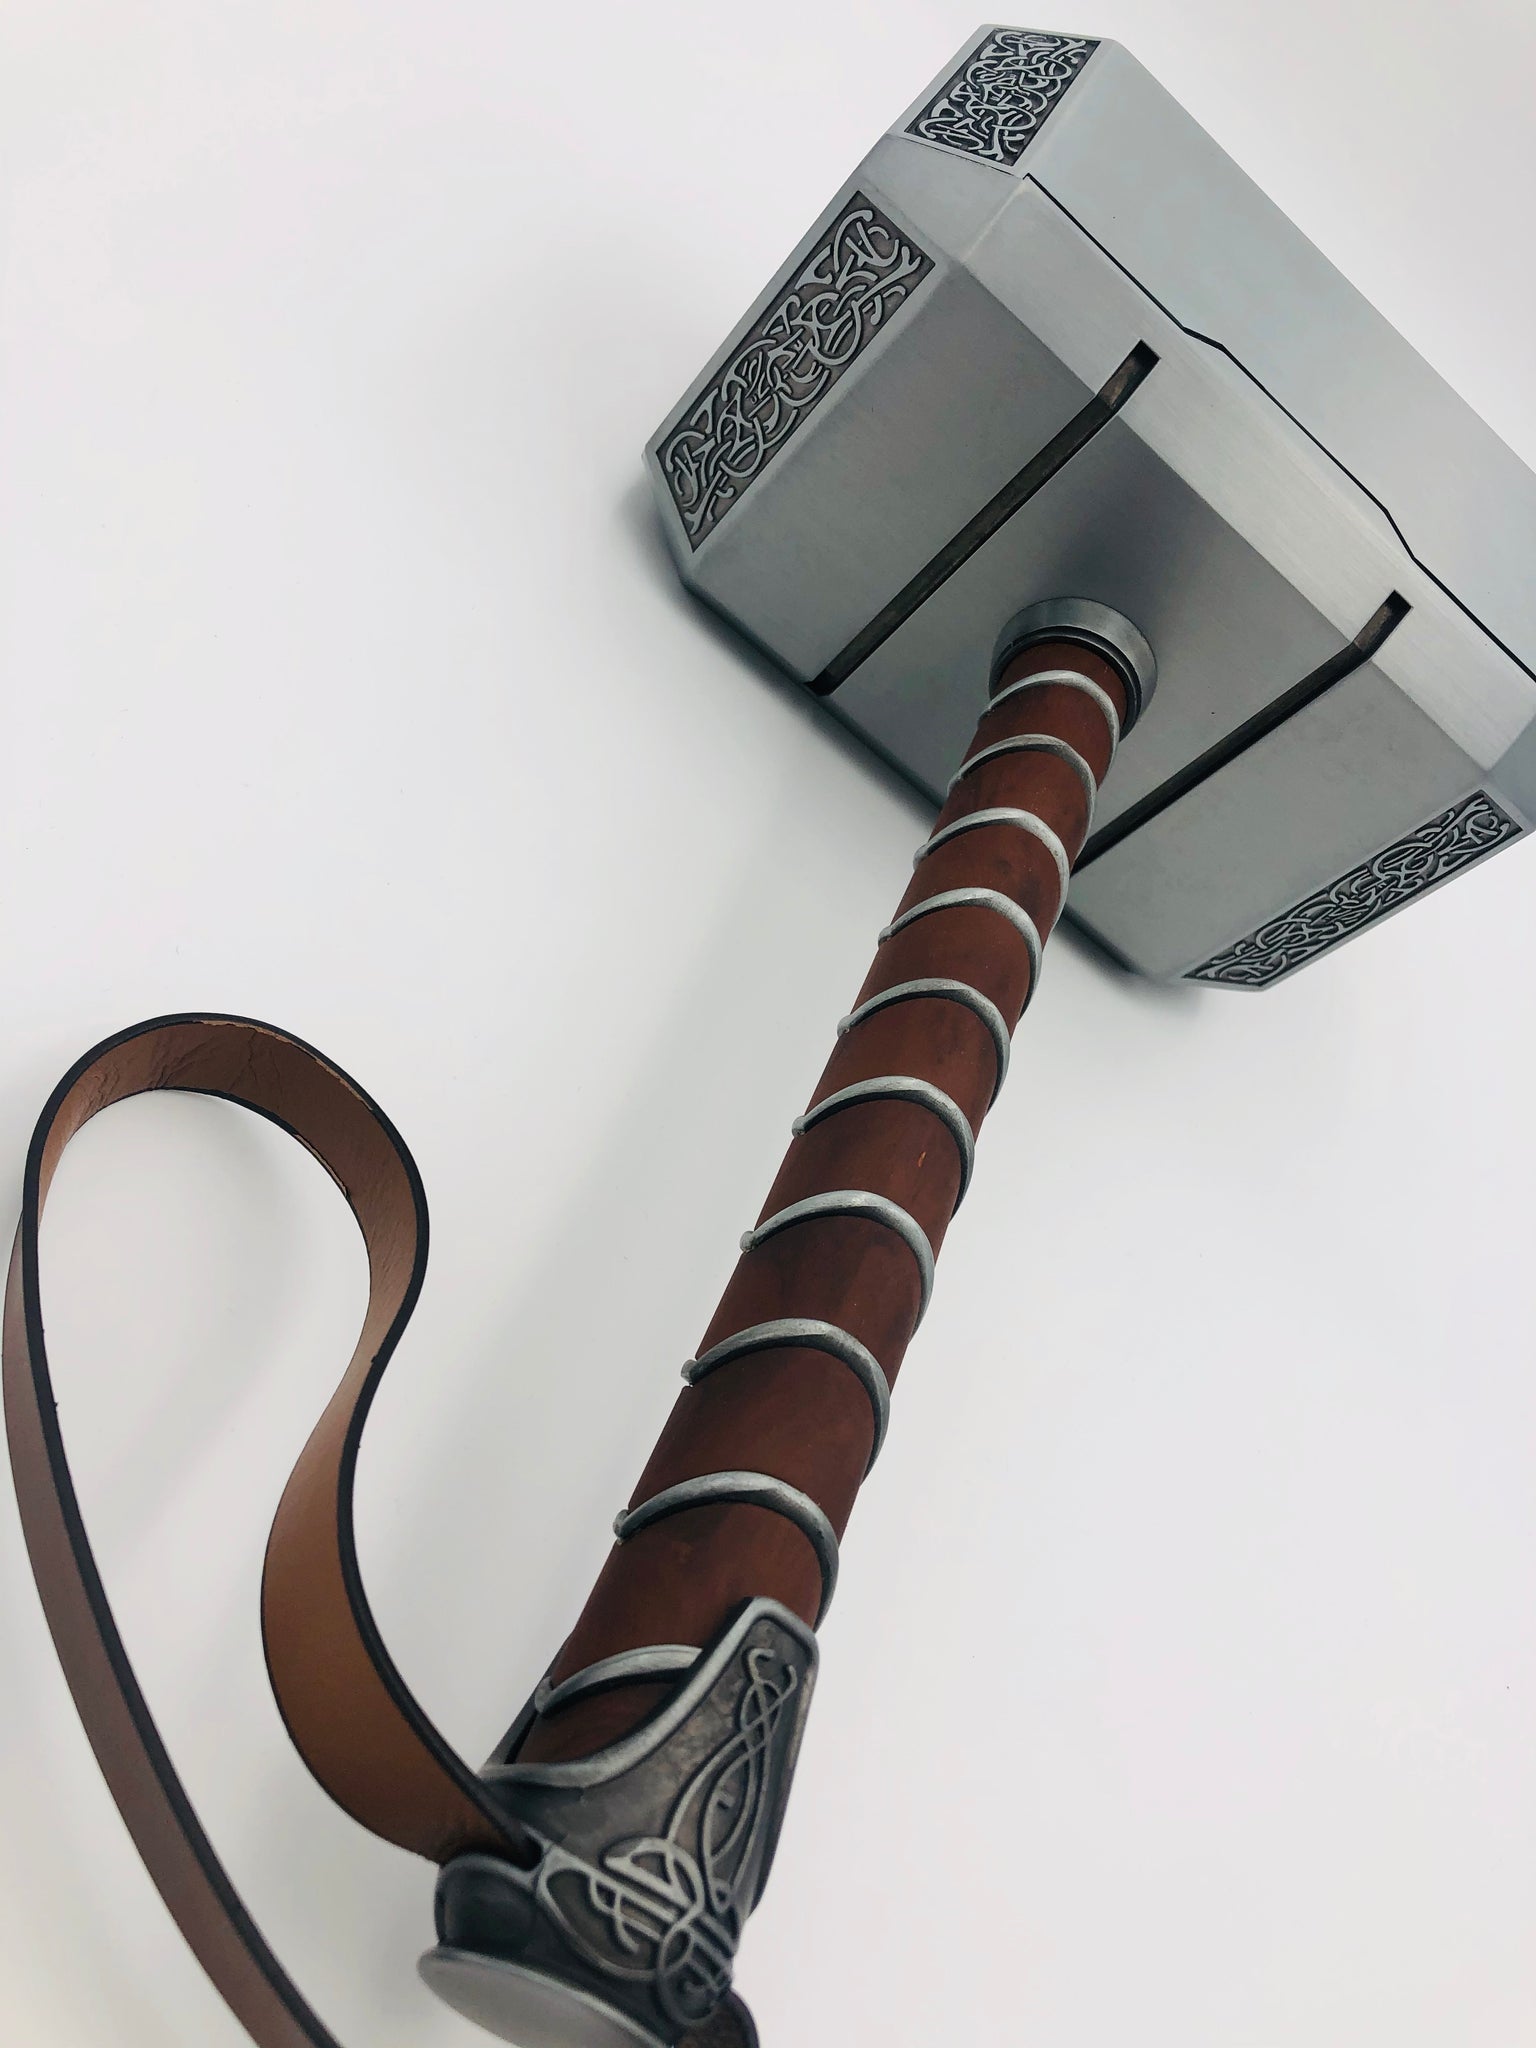 bacon Zoologisk have Render All metal 1:1 Norse Thor Hammer prop – Shield labs